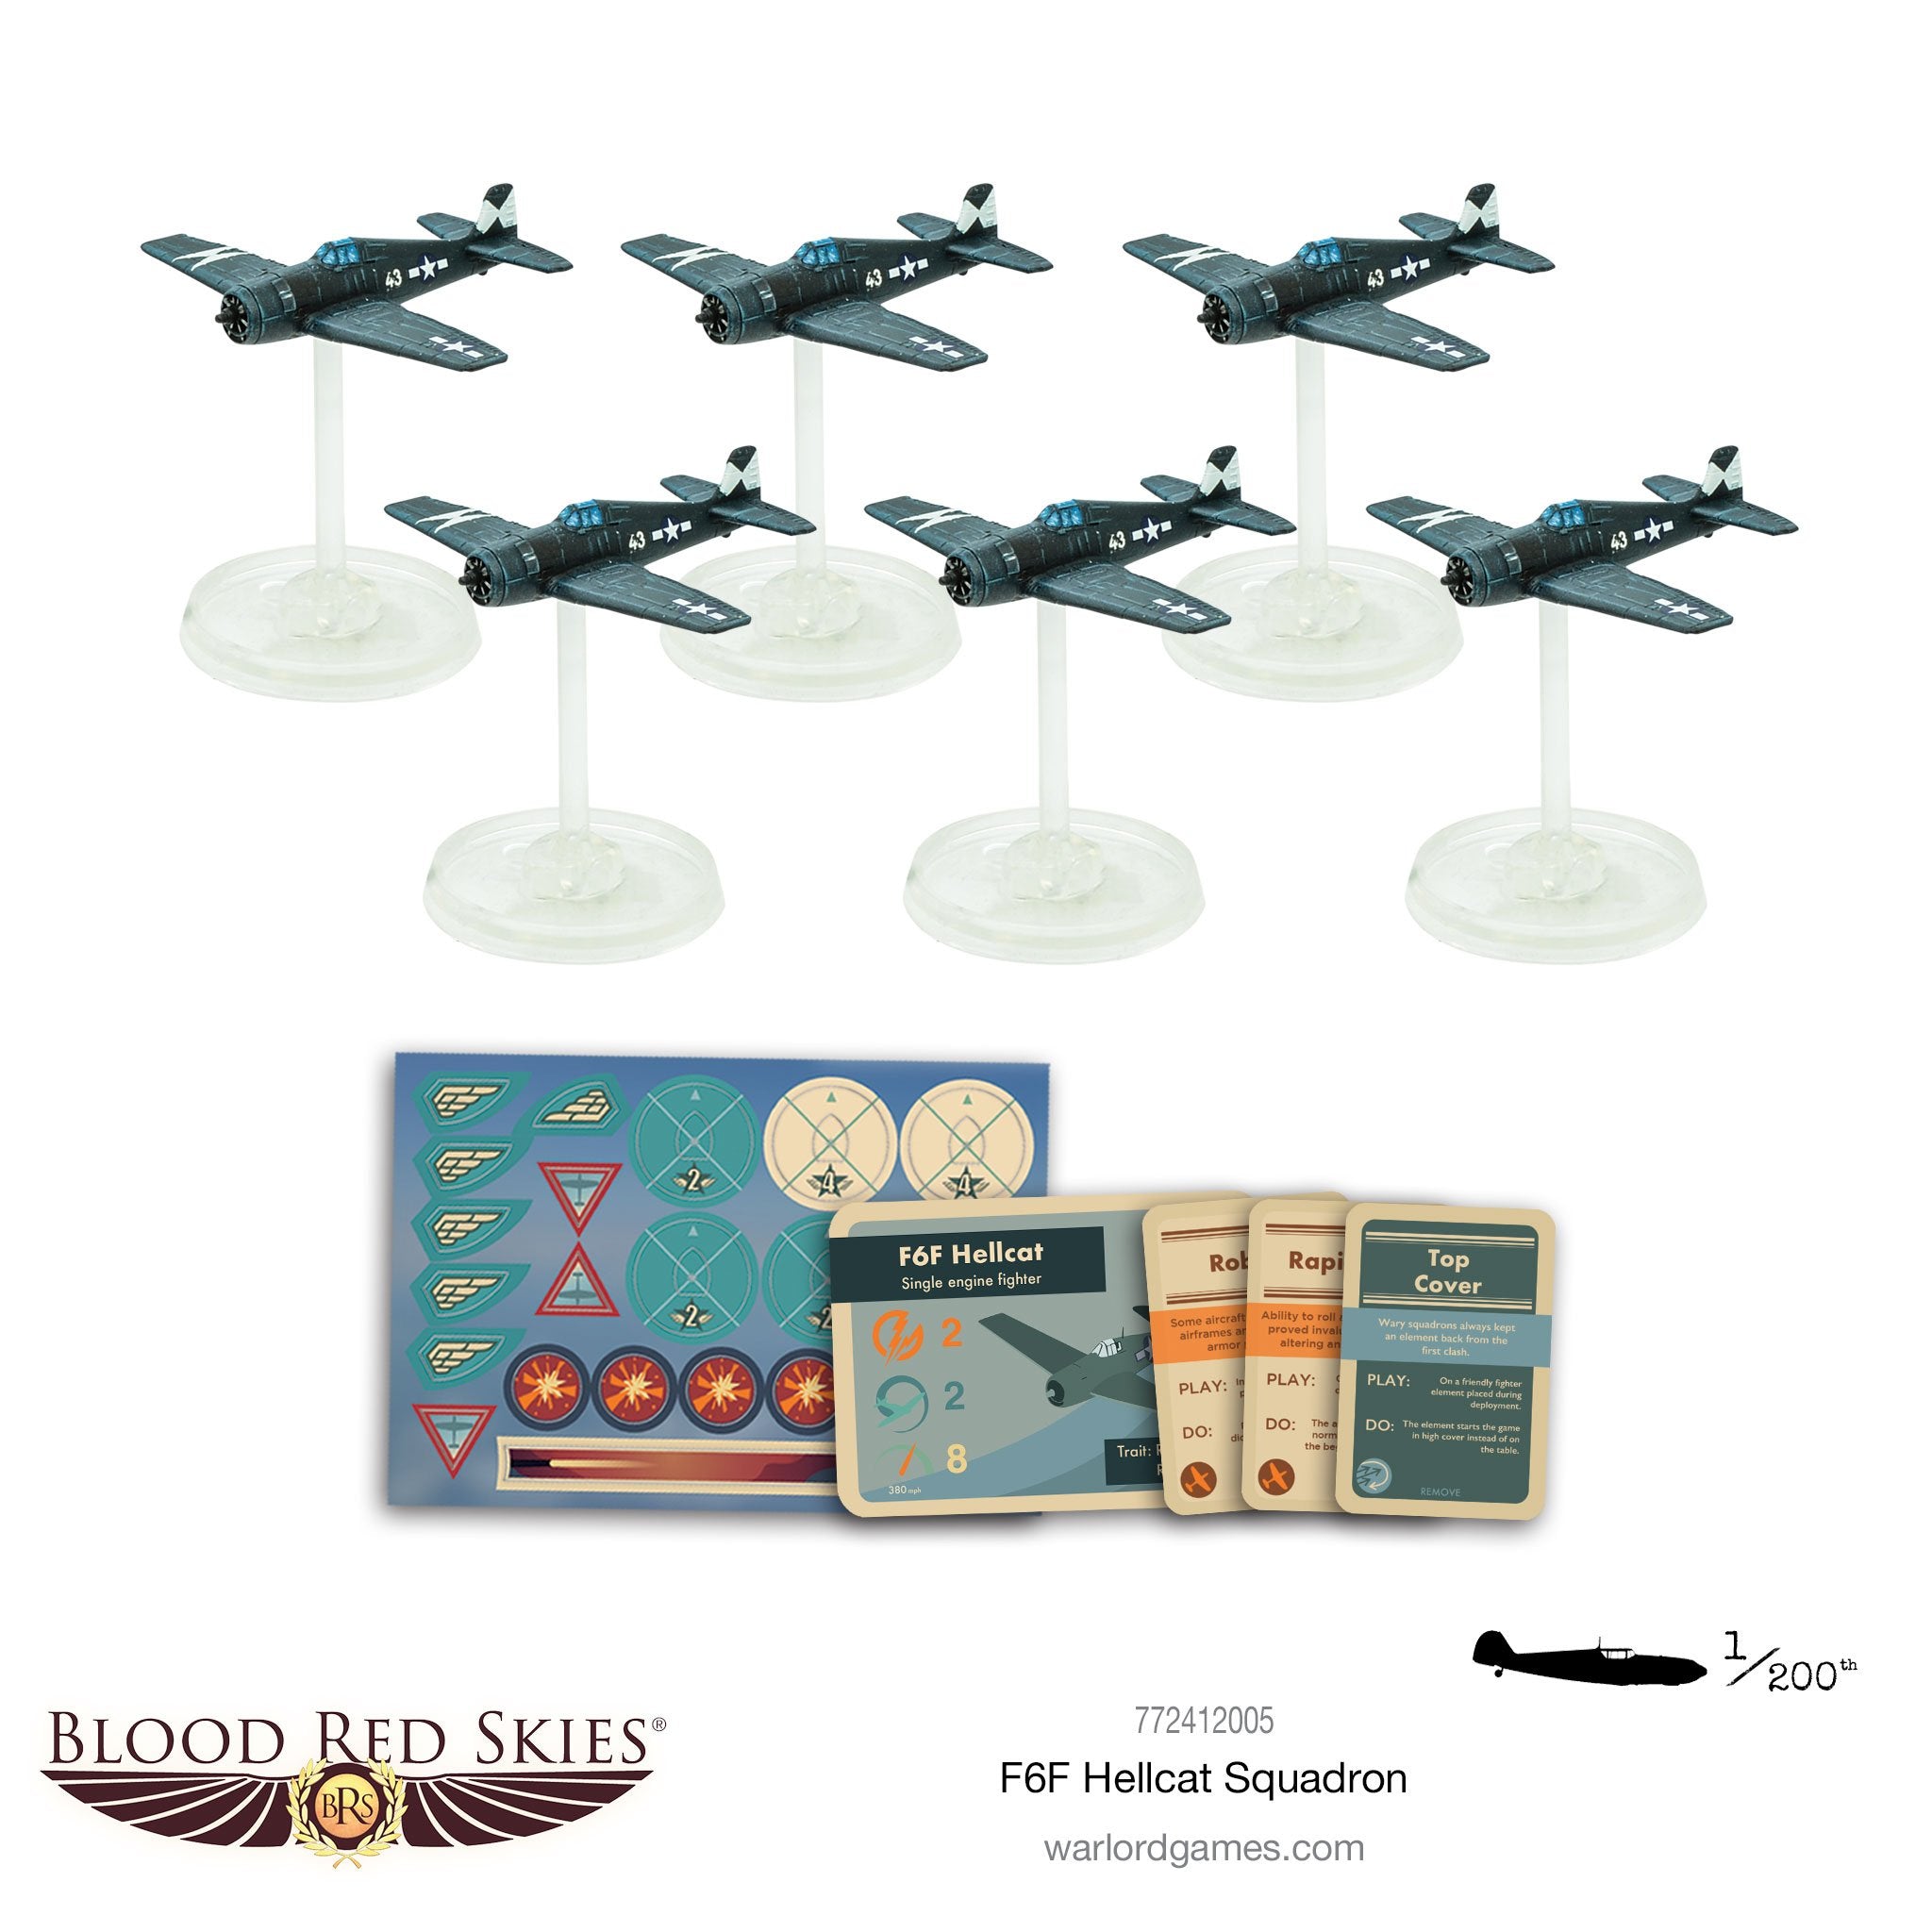 GAME STATE Singaopore Blood Red Skies: F6F Hellcat Squadron